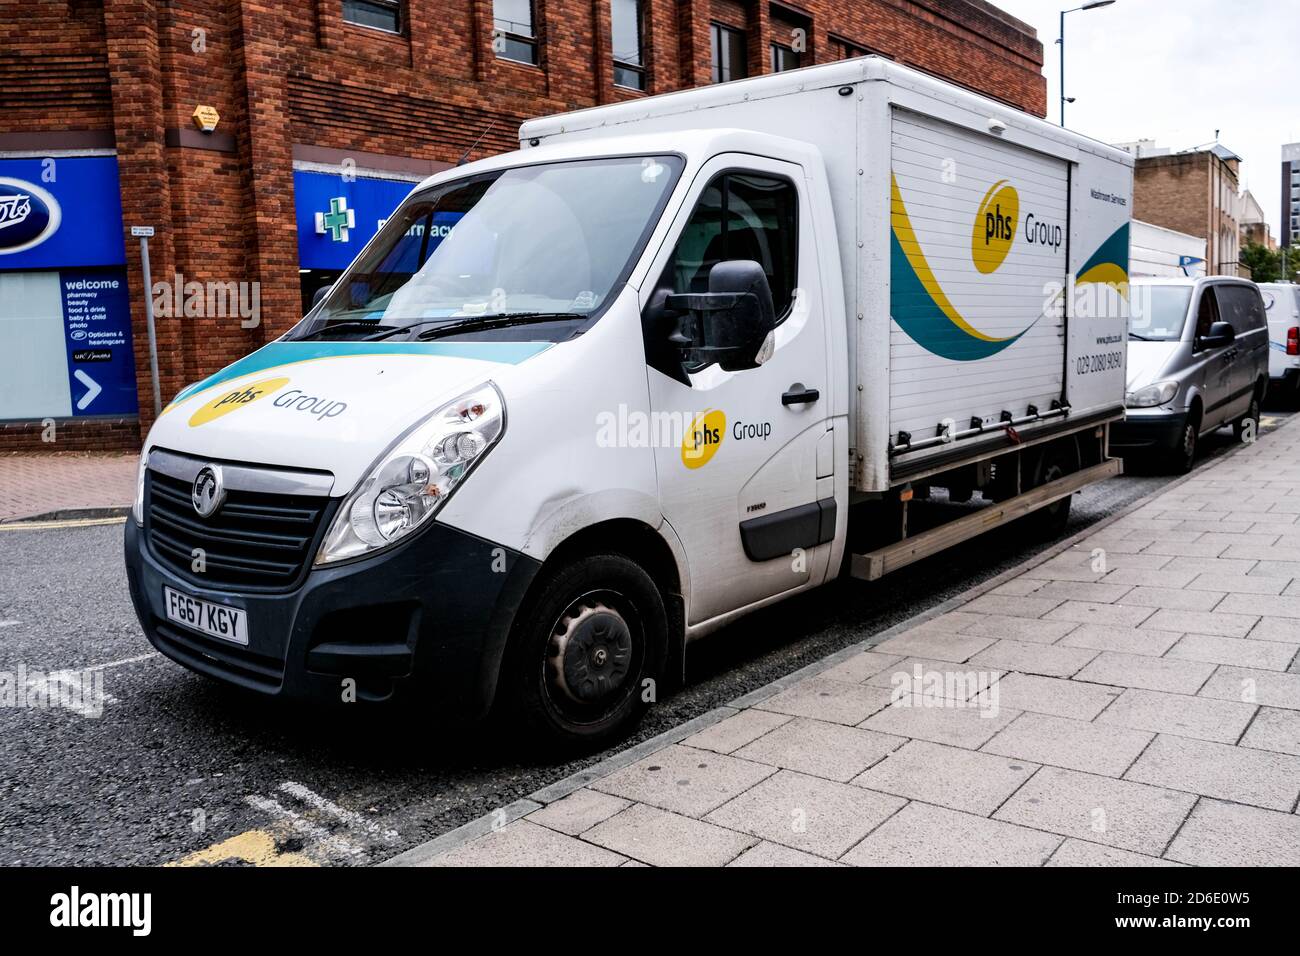 London UK October 2020, PHS Sanitary Consumables Delivery Van Parked Roadside Delivering Sanitary Products Stock Photo